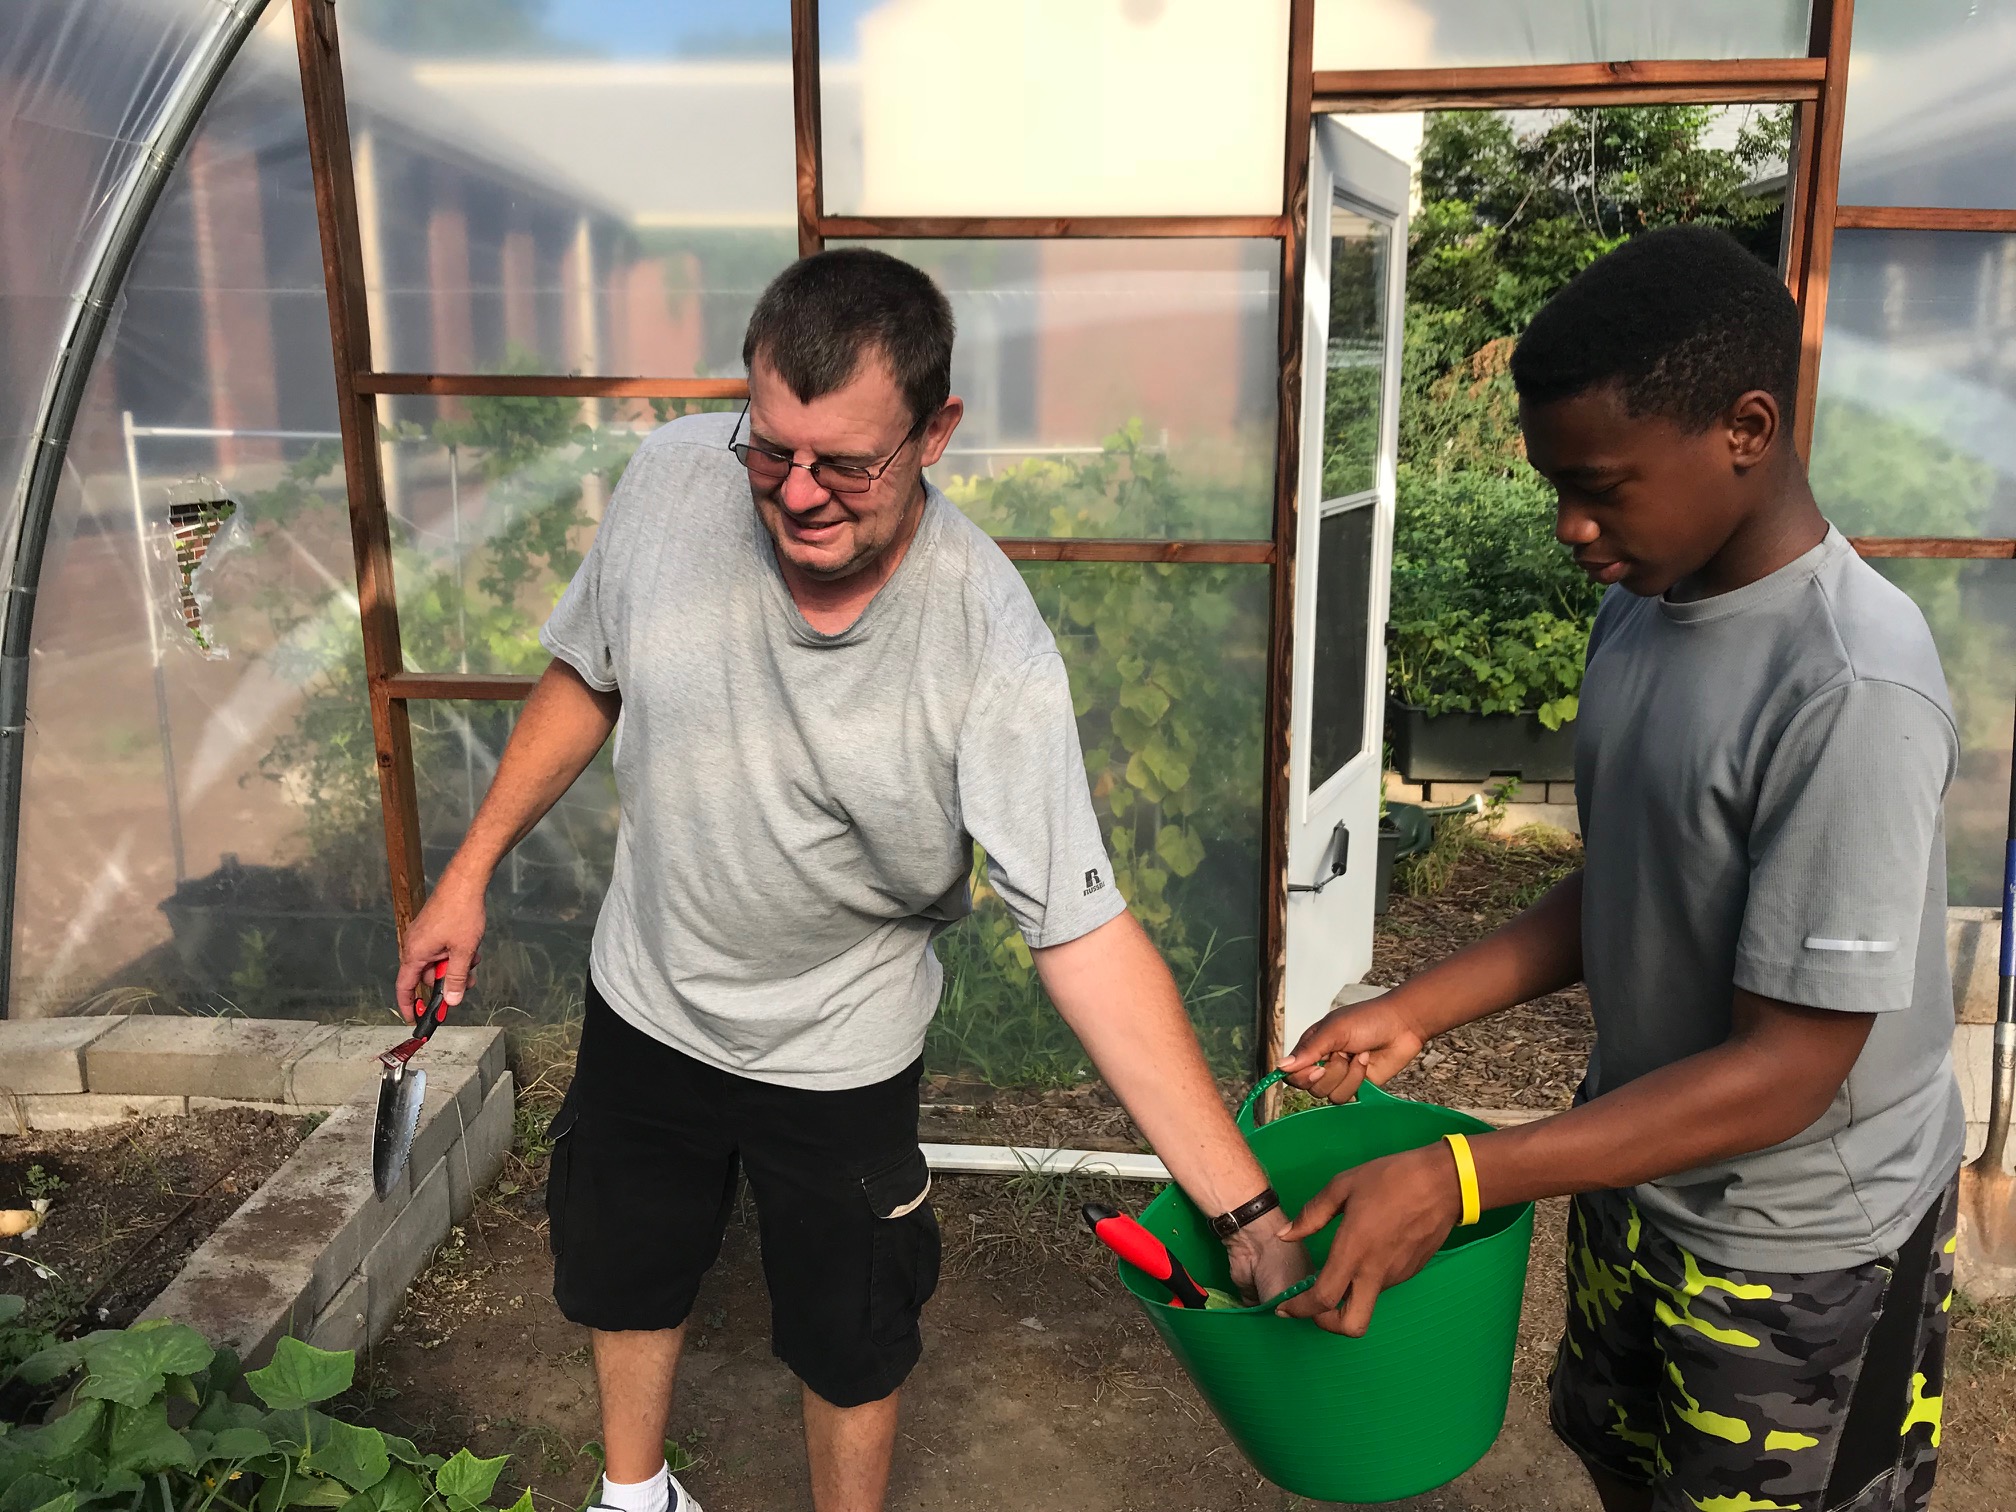 James Ritter, faculty member and manager of the Kingsbury garden program, discusses the pepper crop with student entrepreneur, Barak Muhammad. (Cole Bradley)